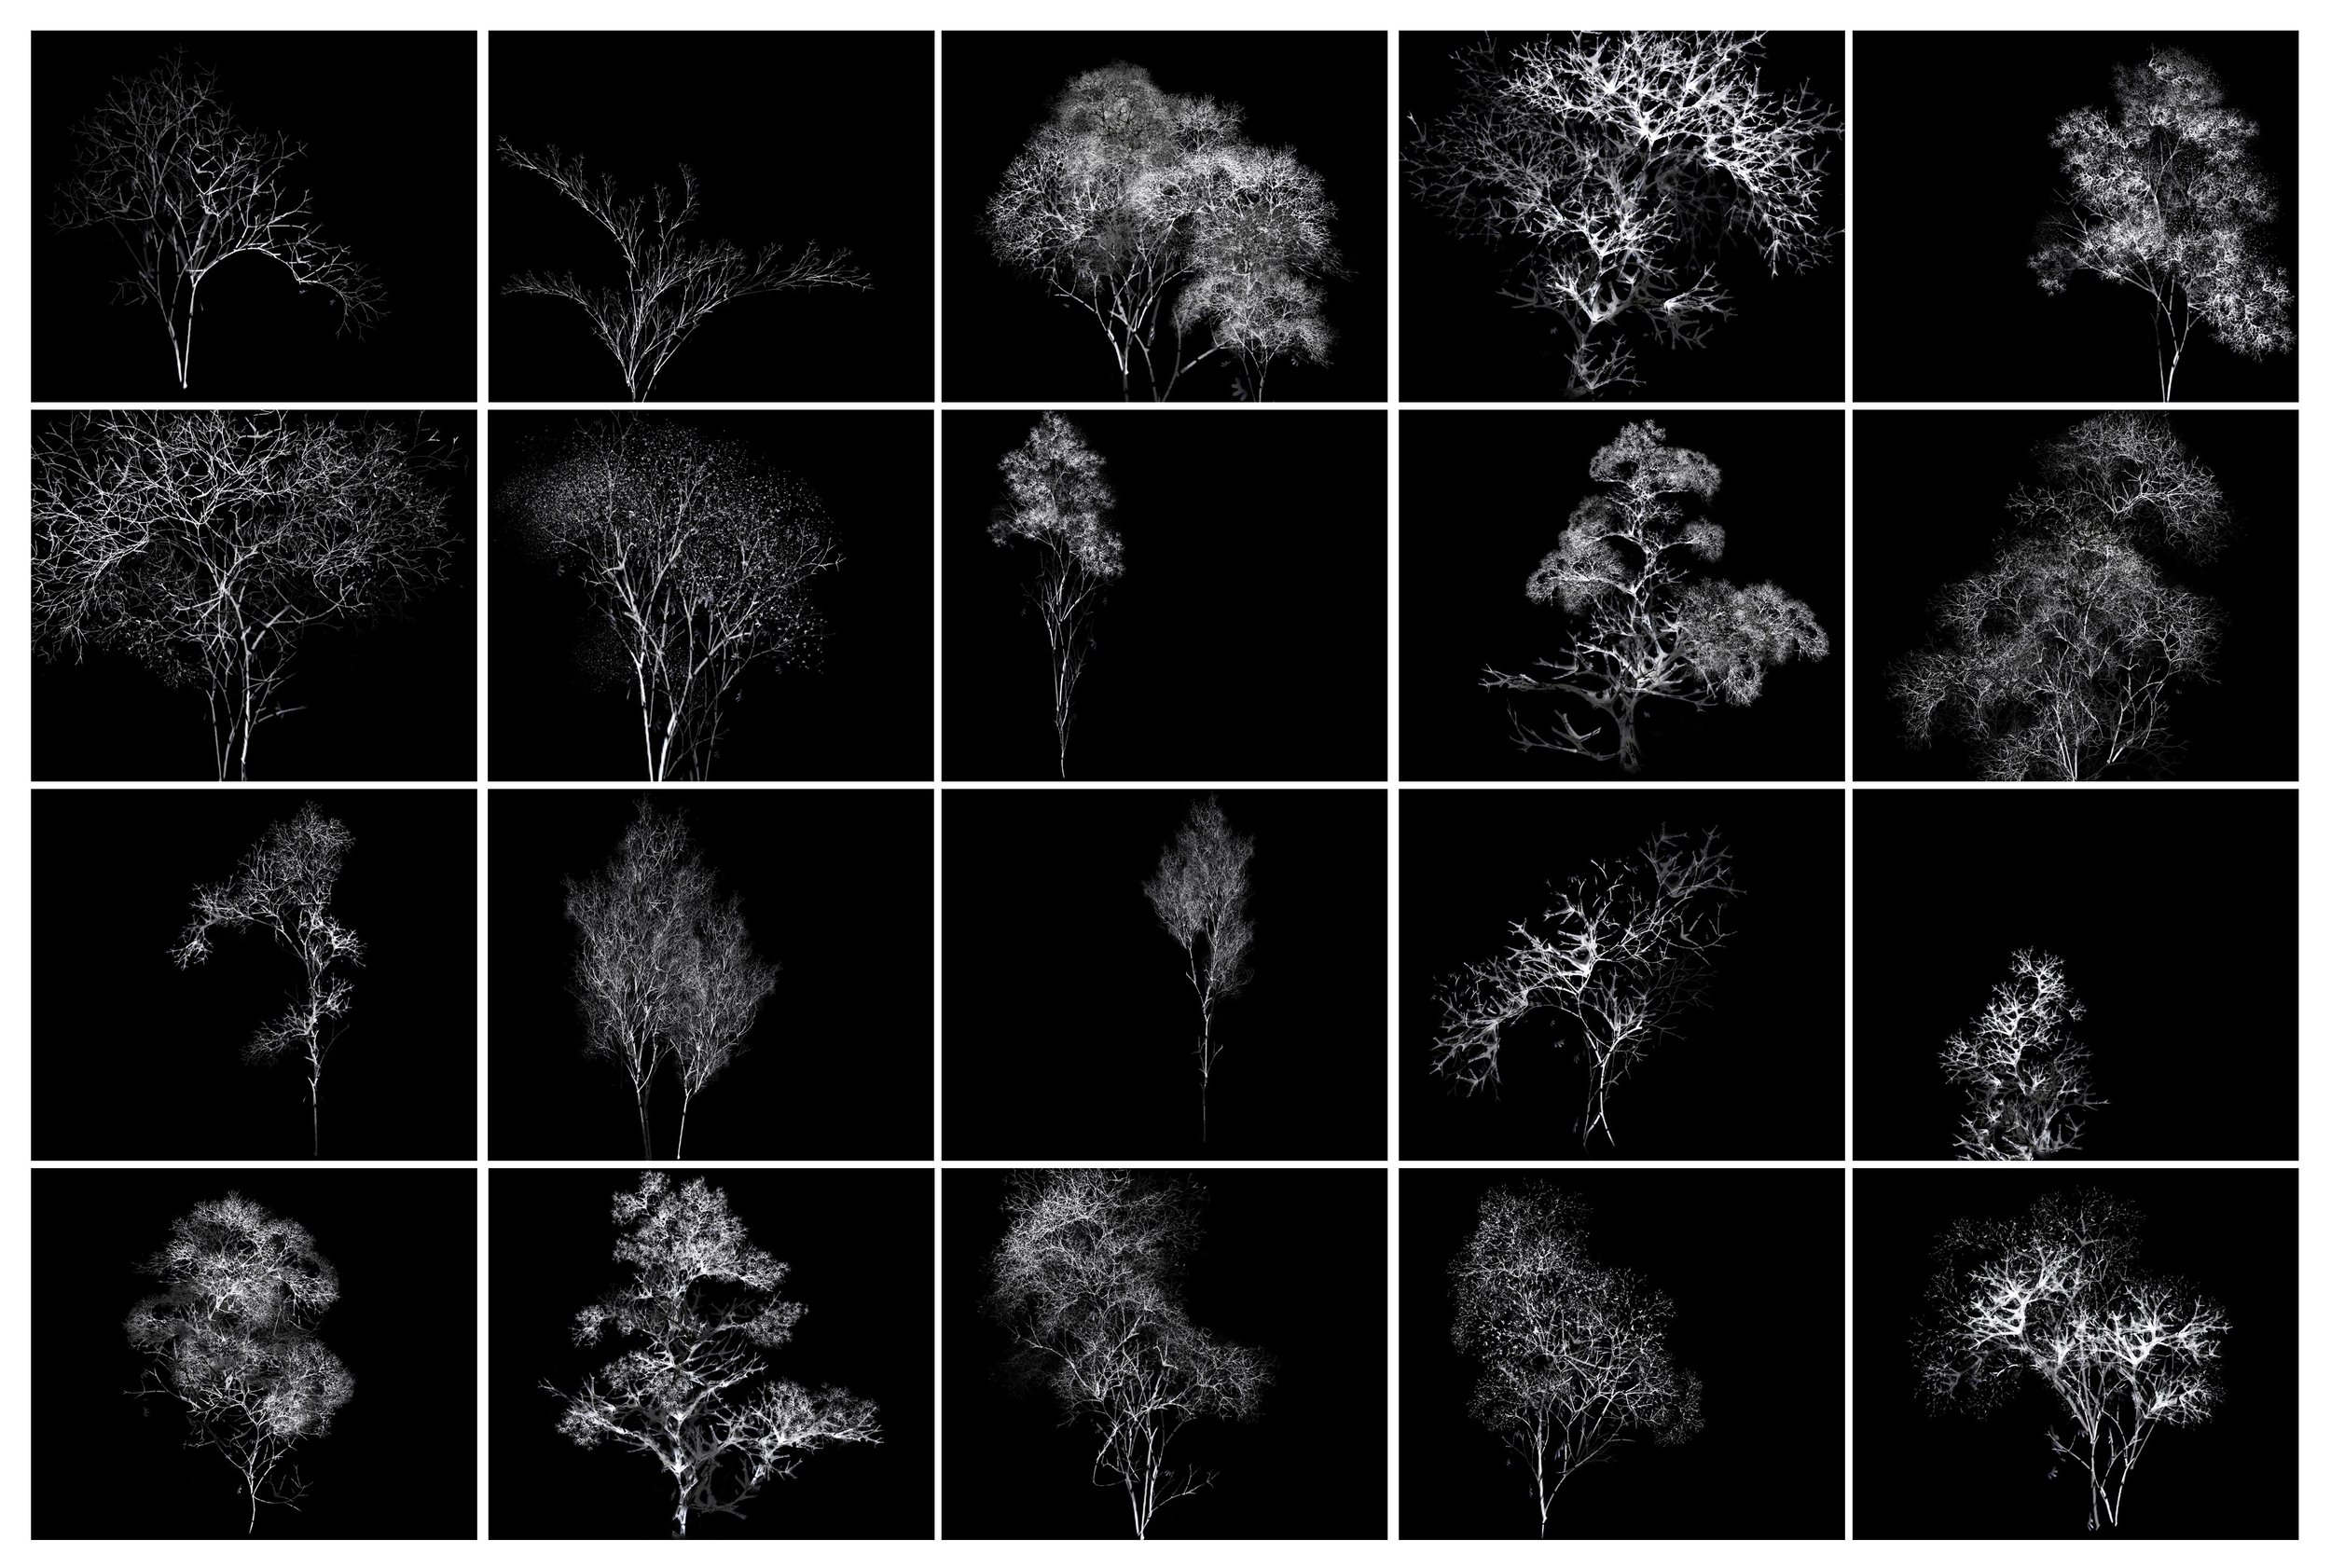  Rohini Devasher,  Arboreal , 2011, set of 20 archival pigment prints, 20 x24 inches each on Hahnemühle Fine Art Baryta paper 